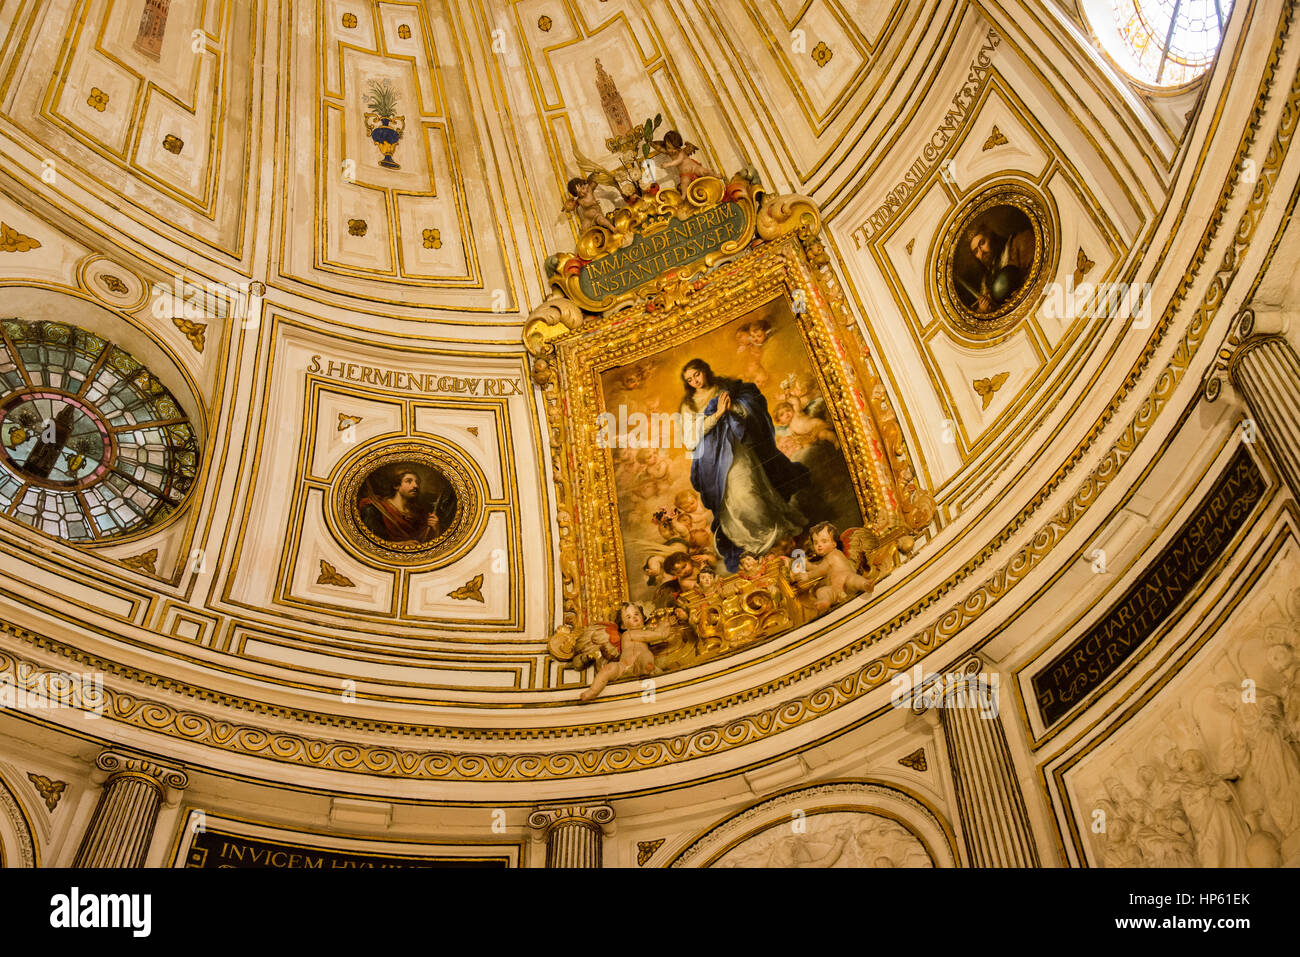 ceiling of sala capitular of girlada cathedral in sevilla spain Stock Photo